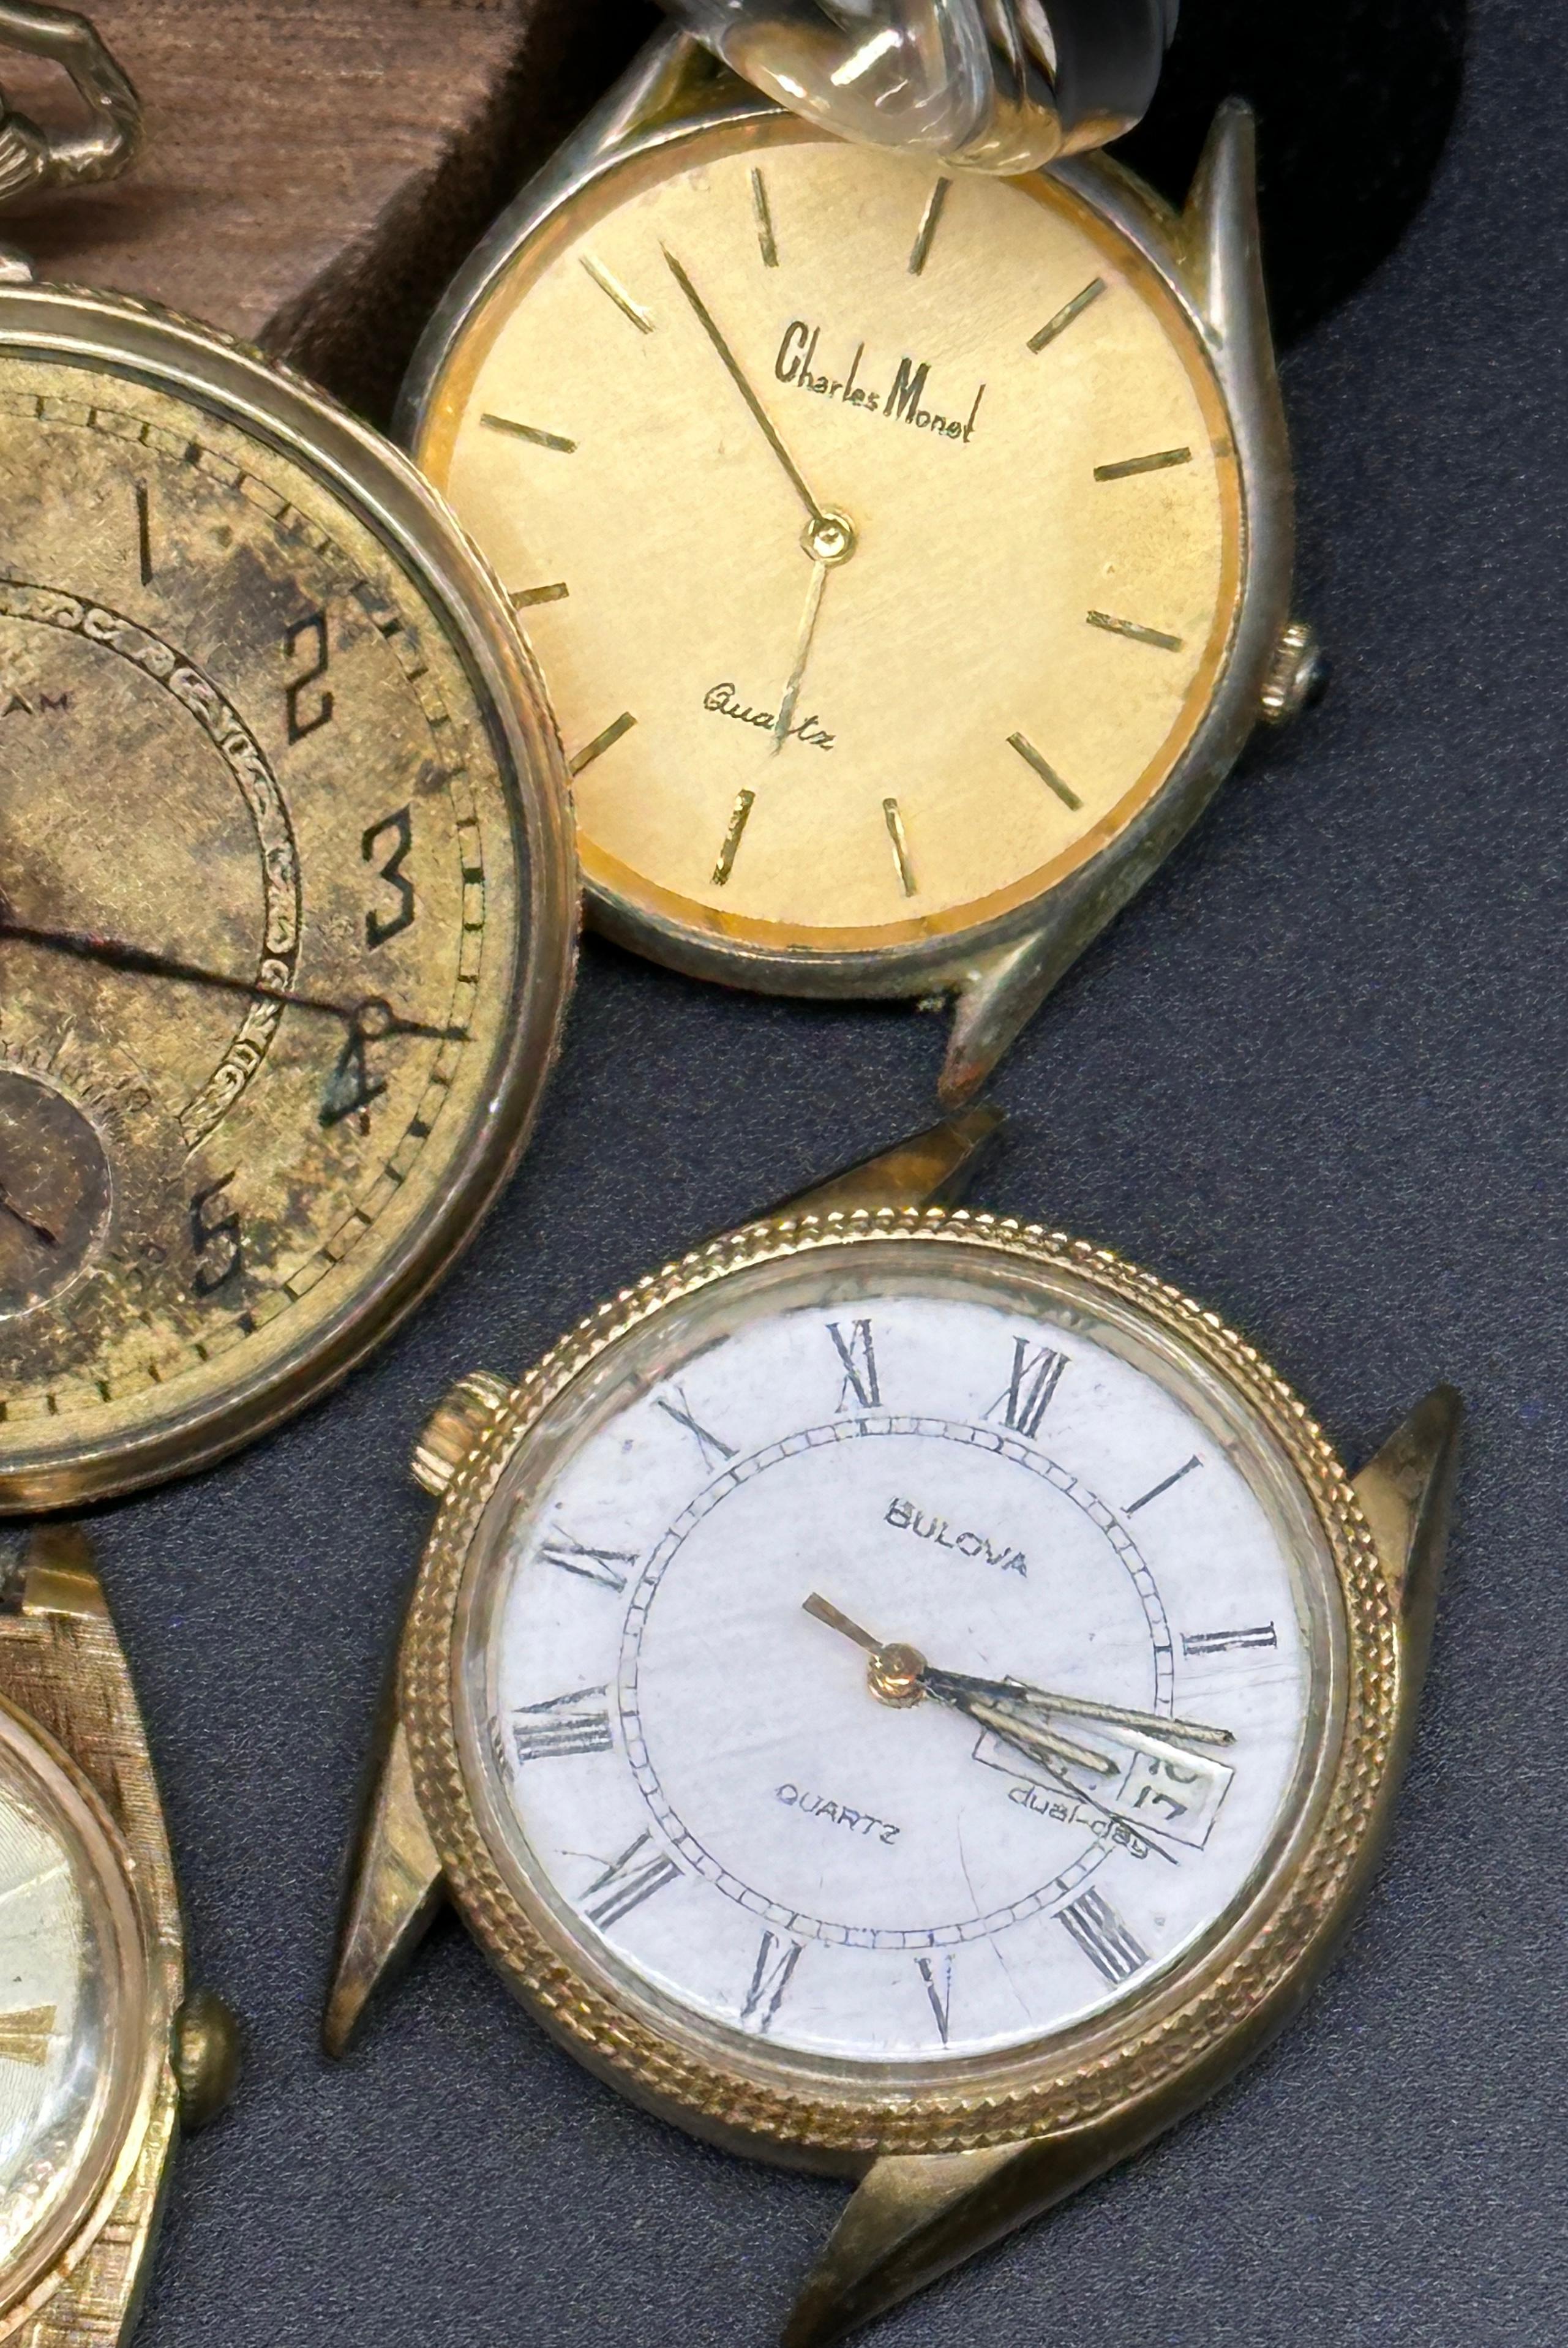 Assortment of Vintage/Antique Men's Wrist Watches, Pocket Watches and More